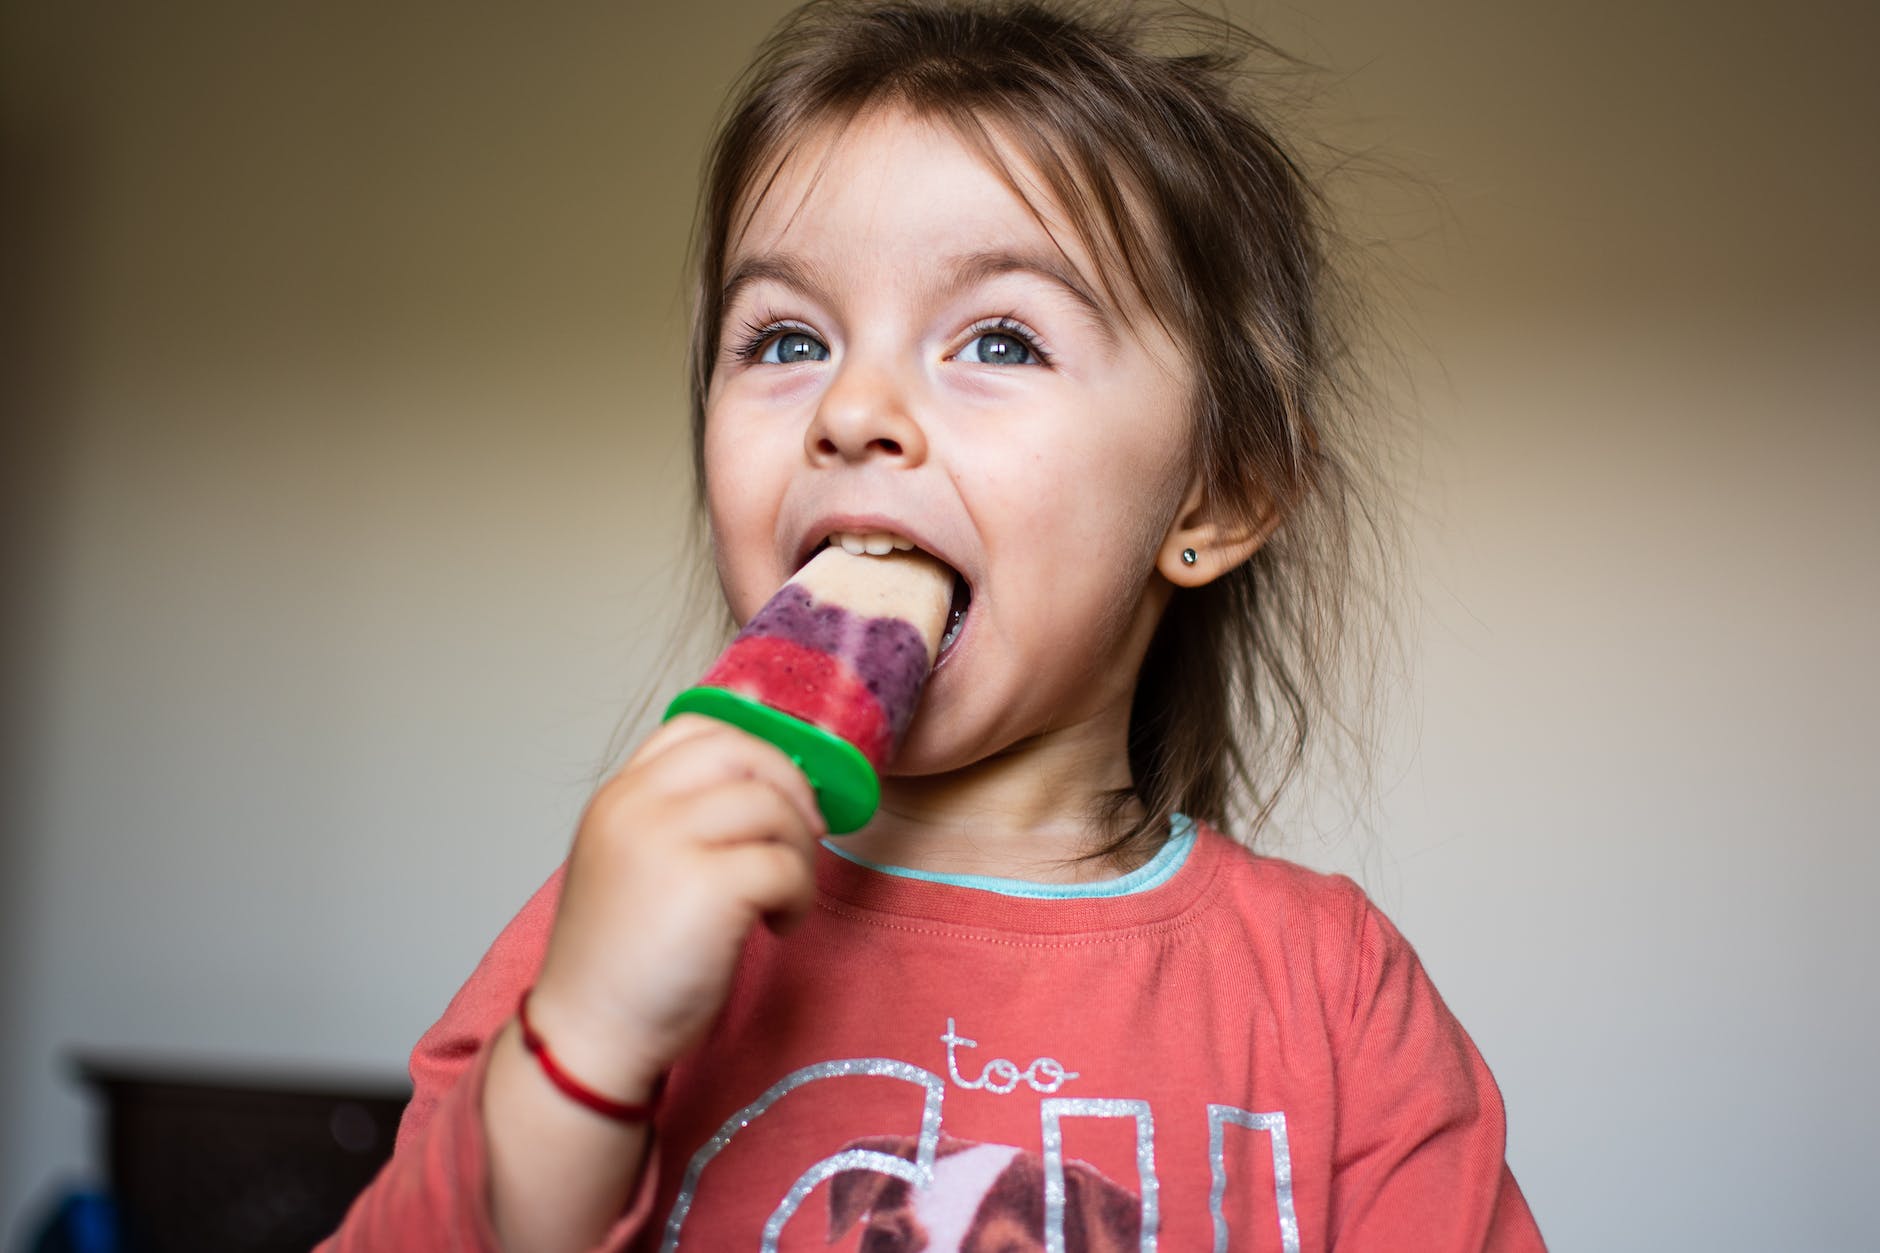 Girl eating popsicle kid-friendly healthy recipes